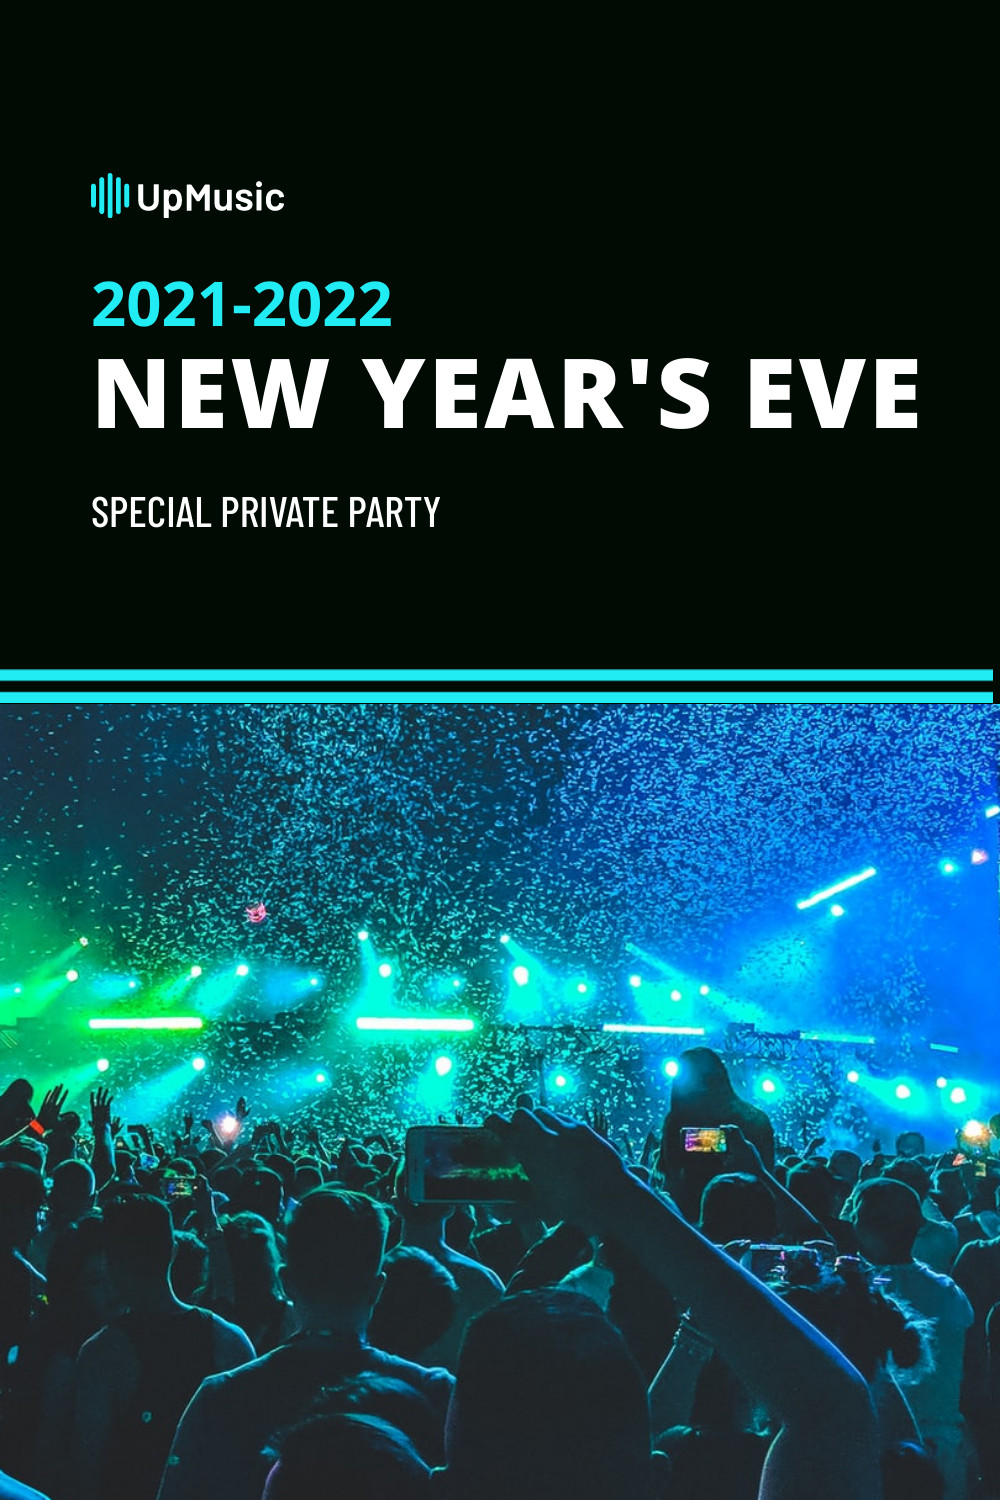 New Year's Special Private Party